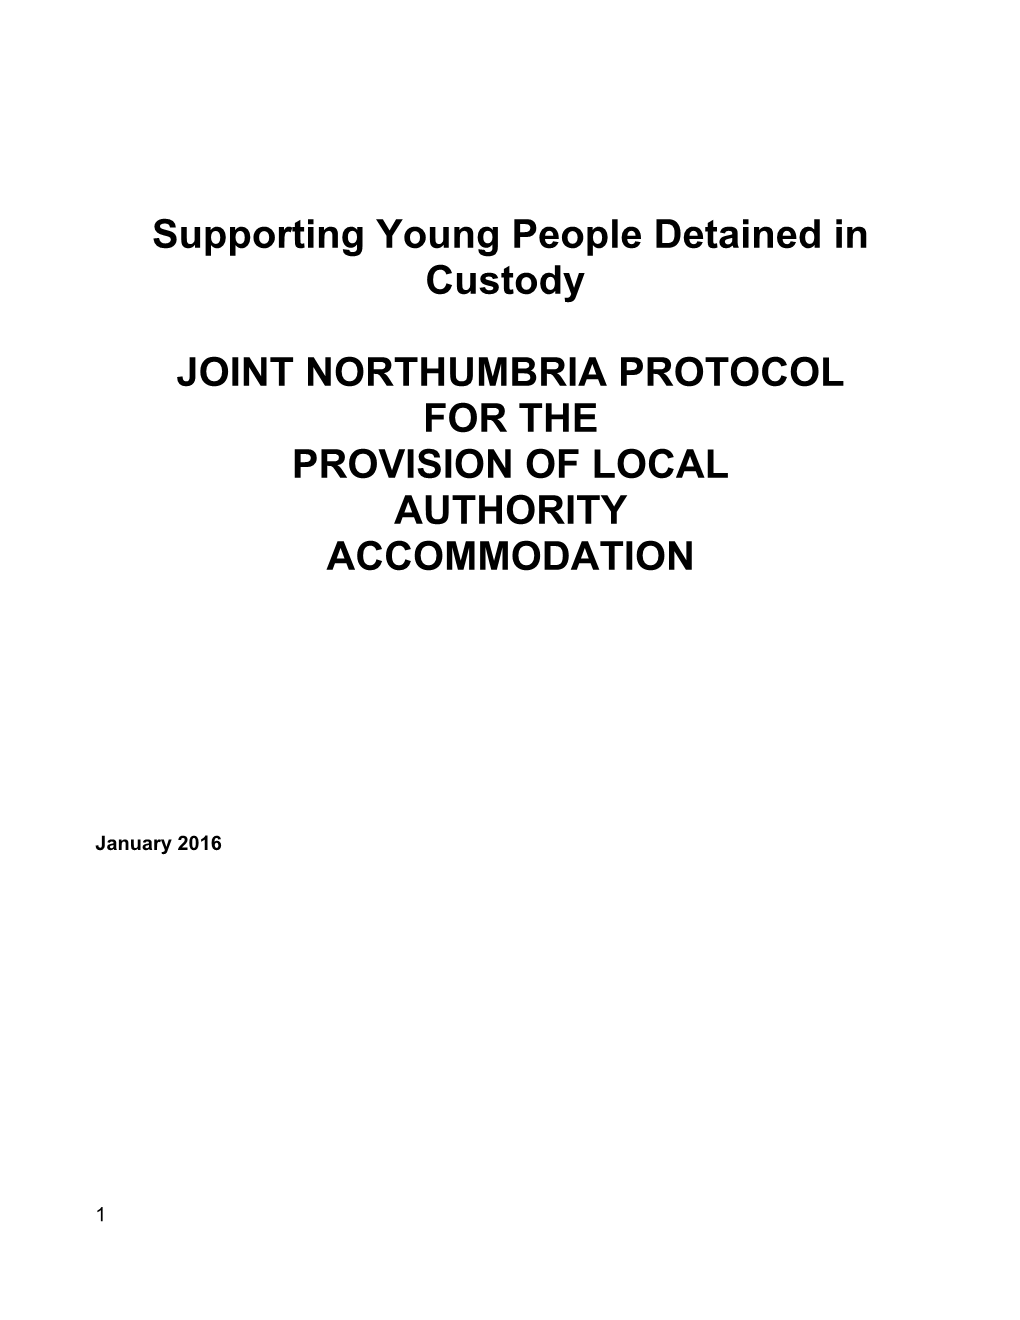 Supporting Young People Detained in Custody